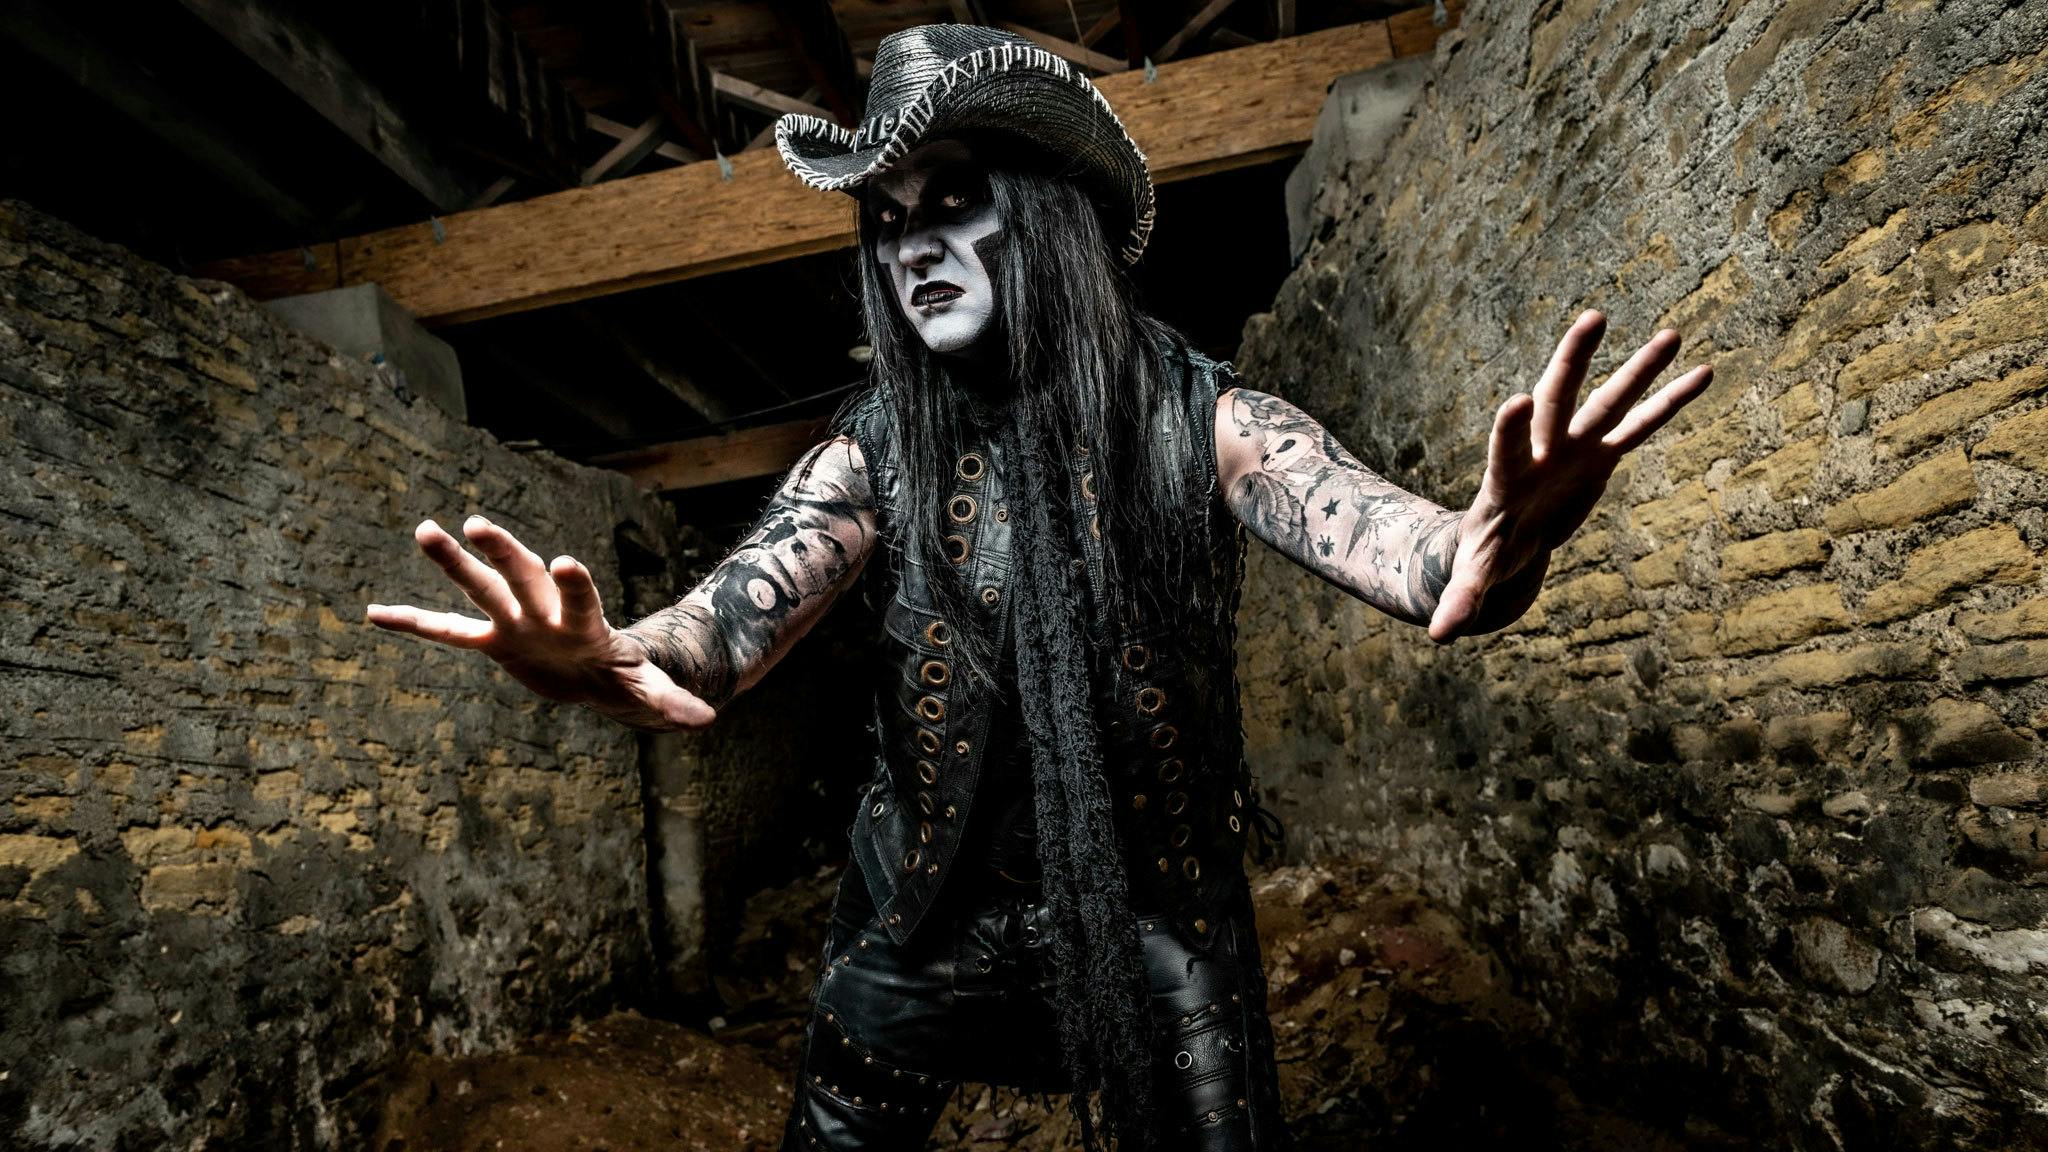 “I got fried-chickened at the chicken joint!”: 13 Questions with Wednesday 13